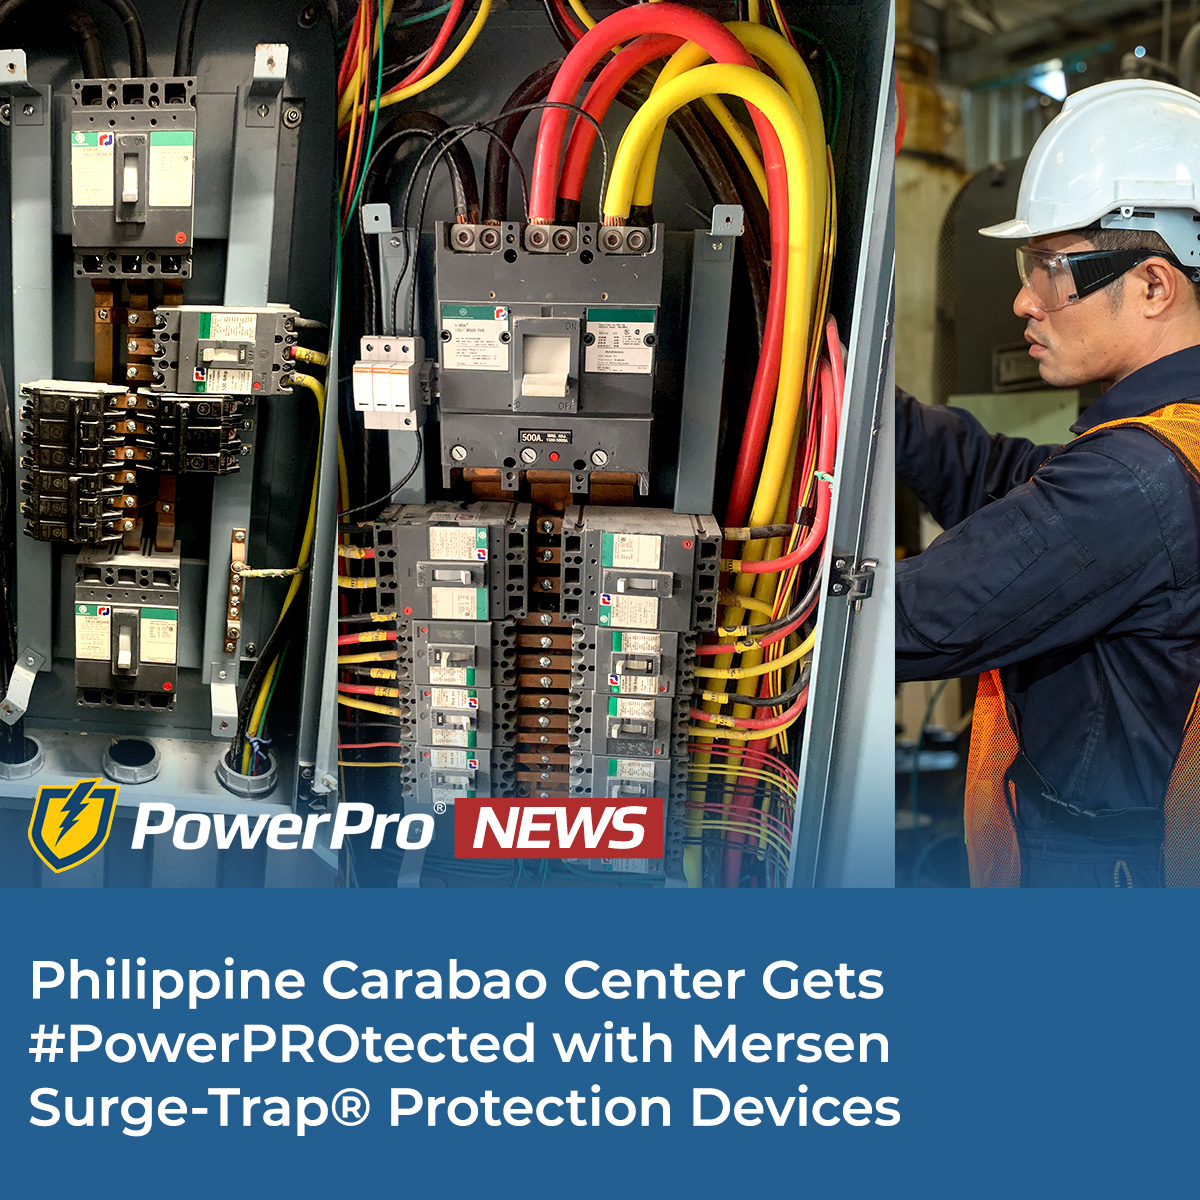 PowerPro Installs Mersen Surge Protection Devices for Philippine Carabao Center